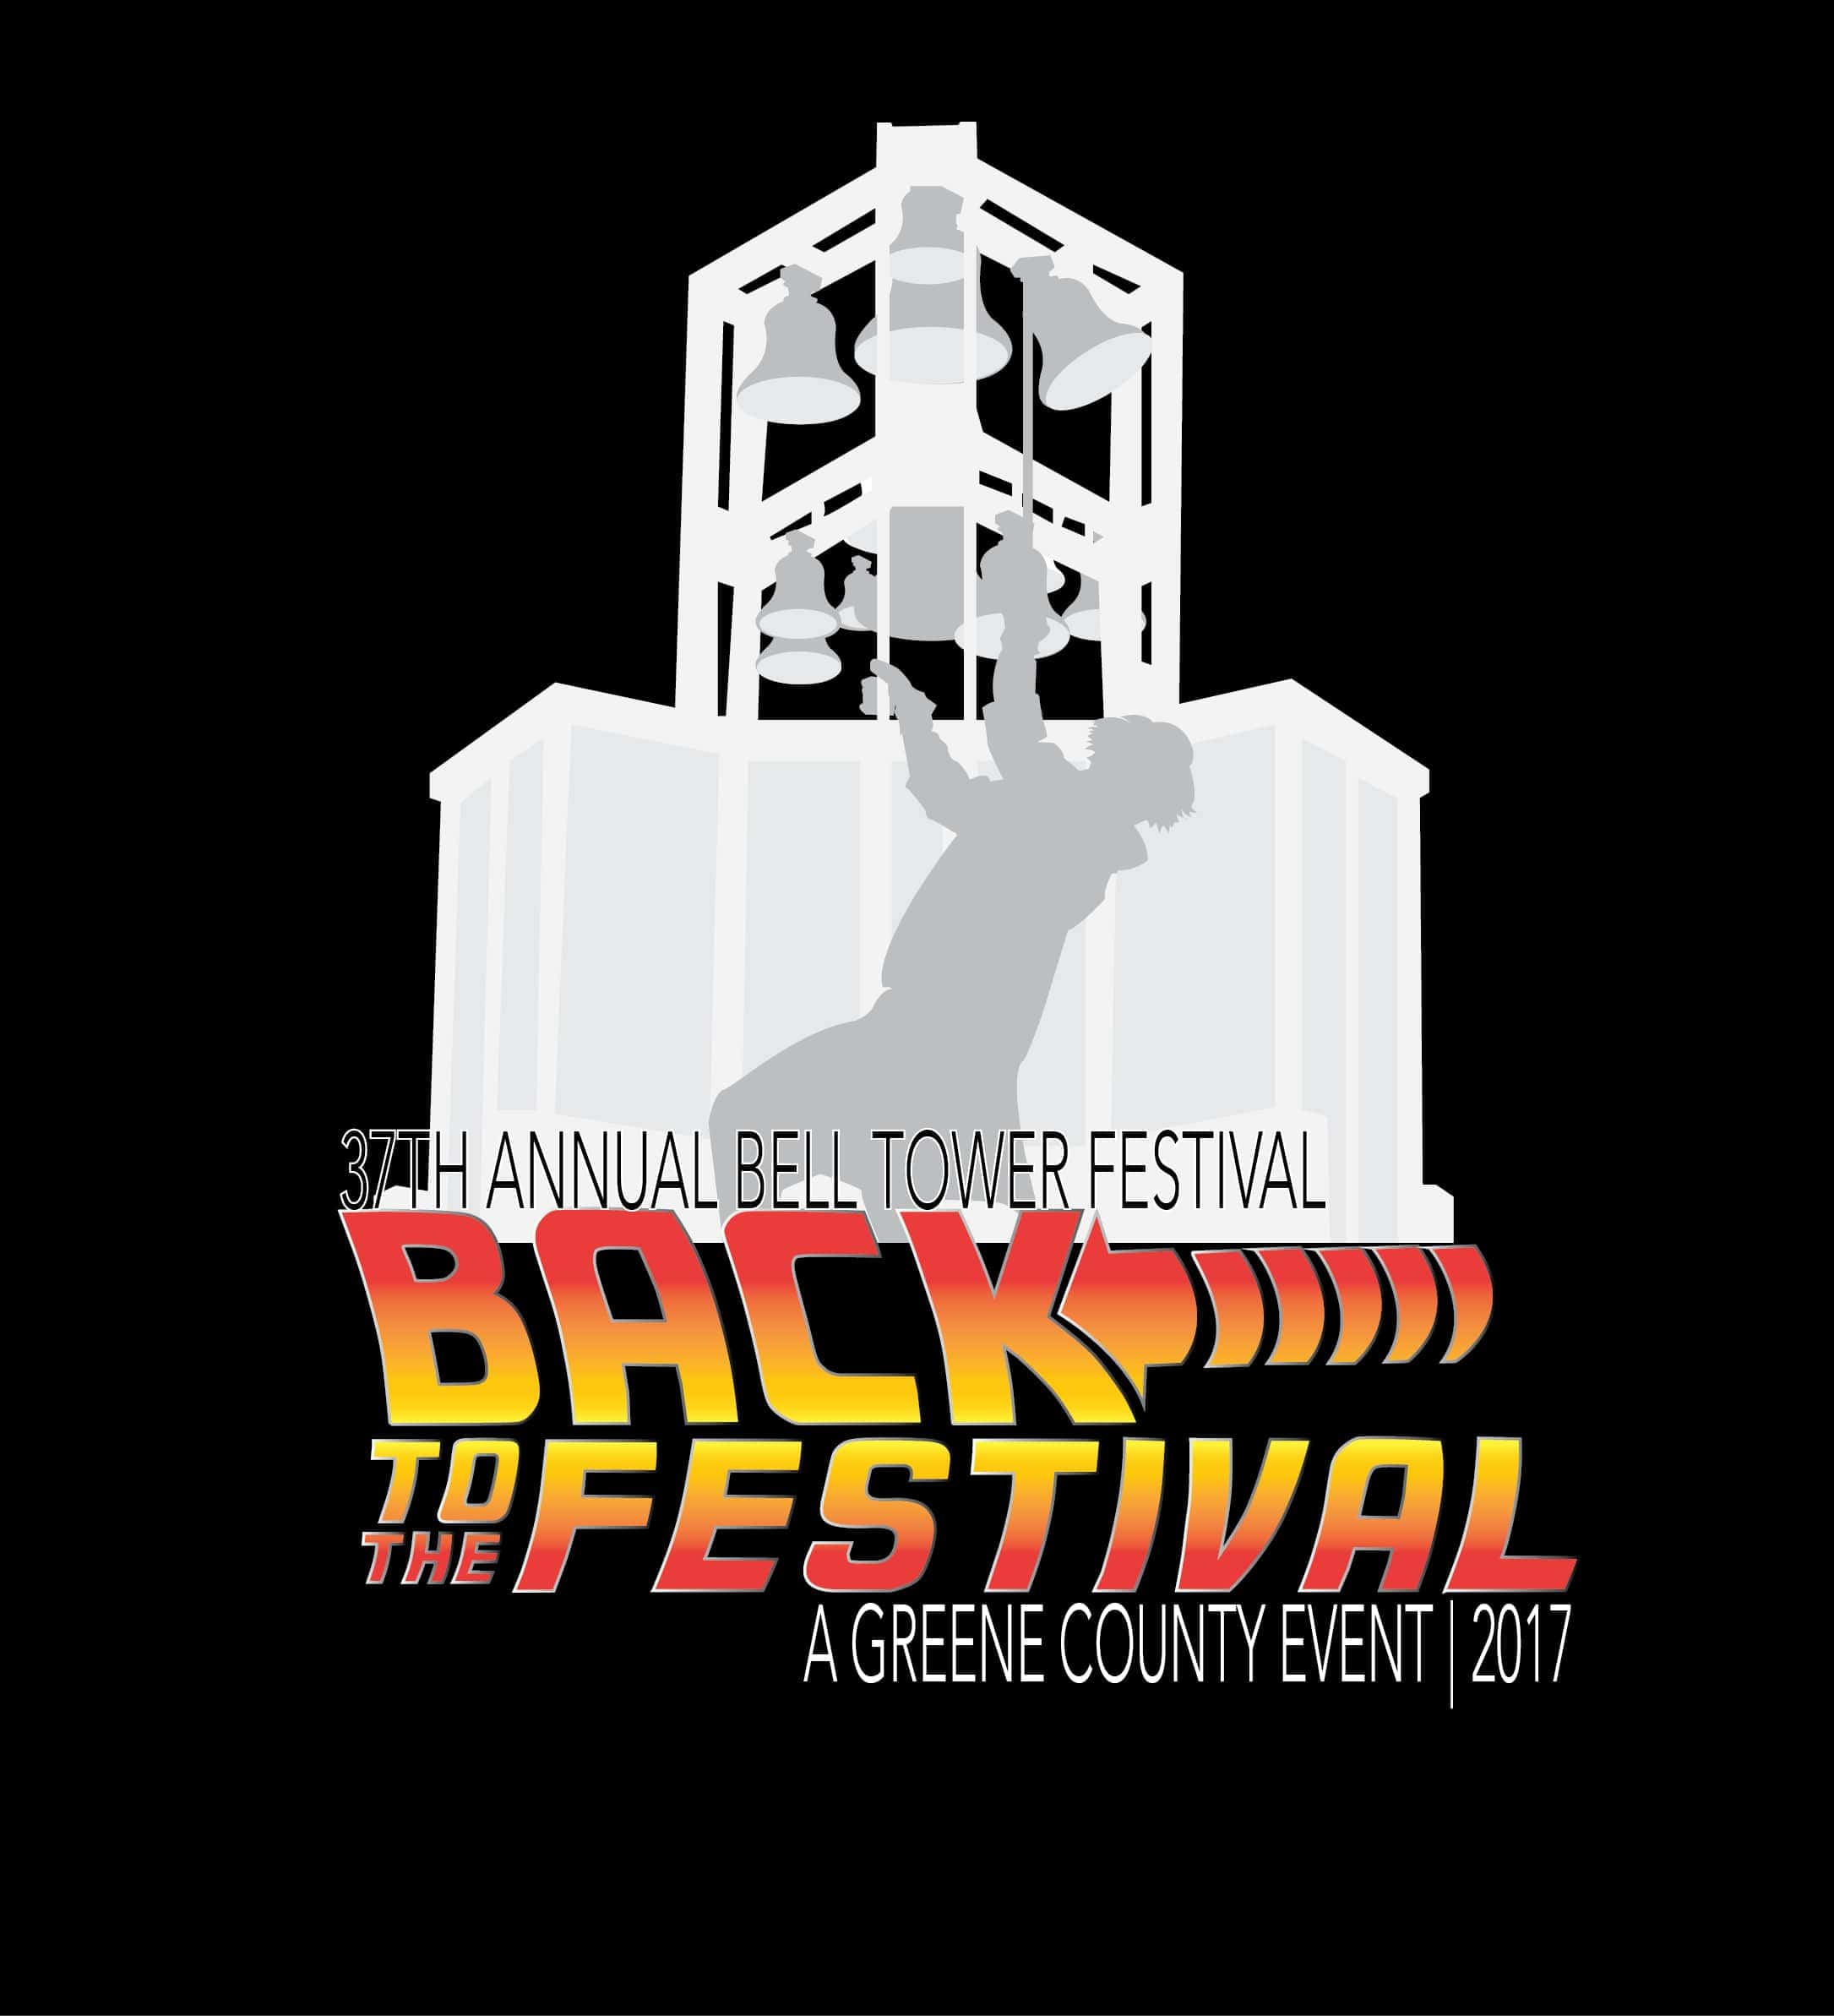 Full Slate of Activities Tomorrow at Bell Tower Festival Raccoon